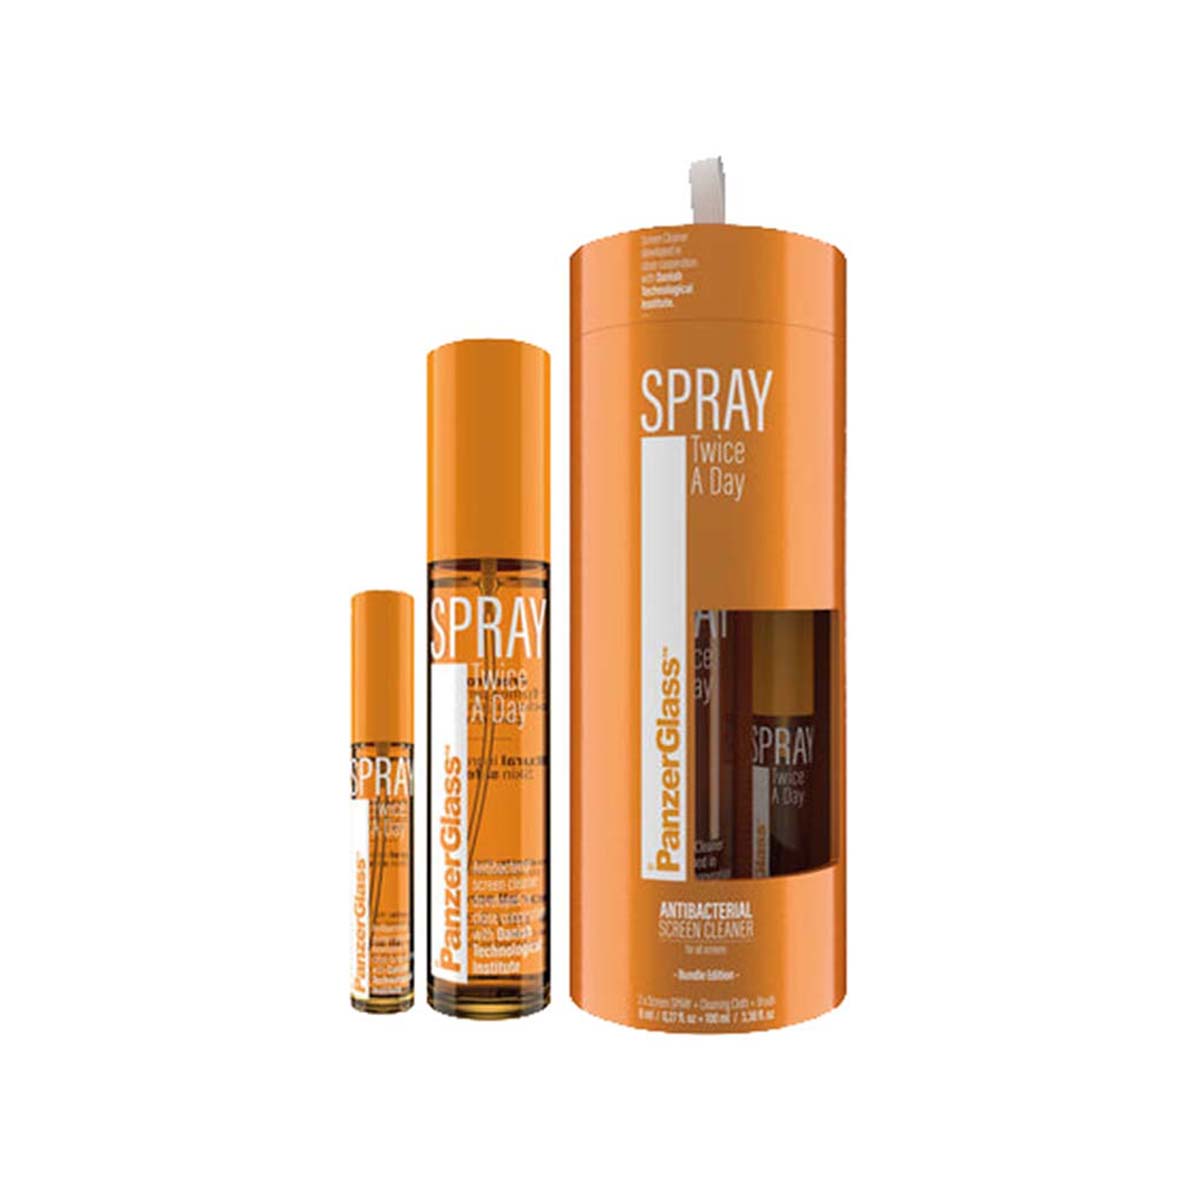 Panzer SPRAY Twice A Day 8 ml + 100 ml bundle for Mobile Phones